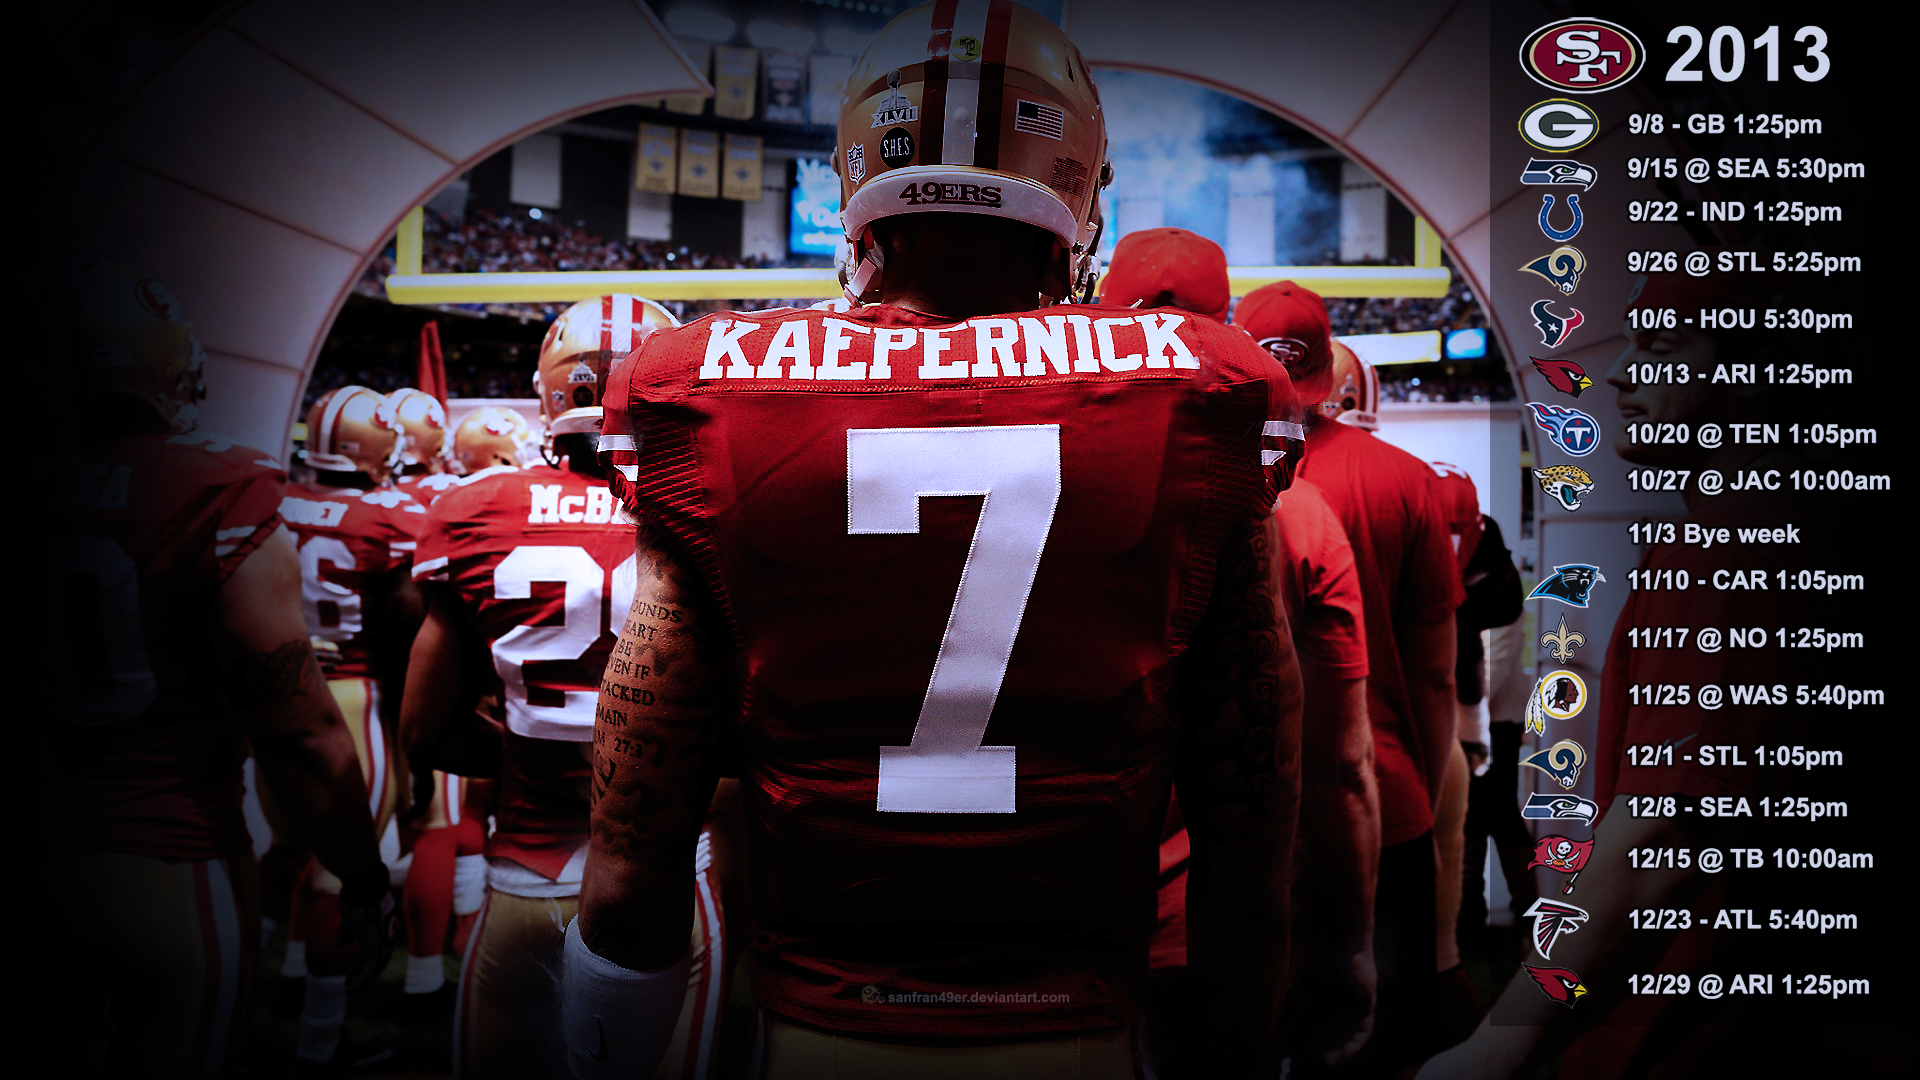 Kaepernick Wallpaper With Schedule Pst By